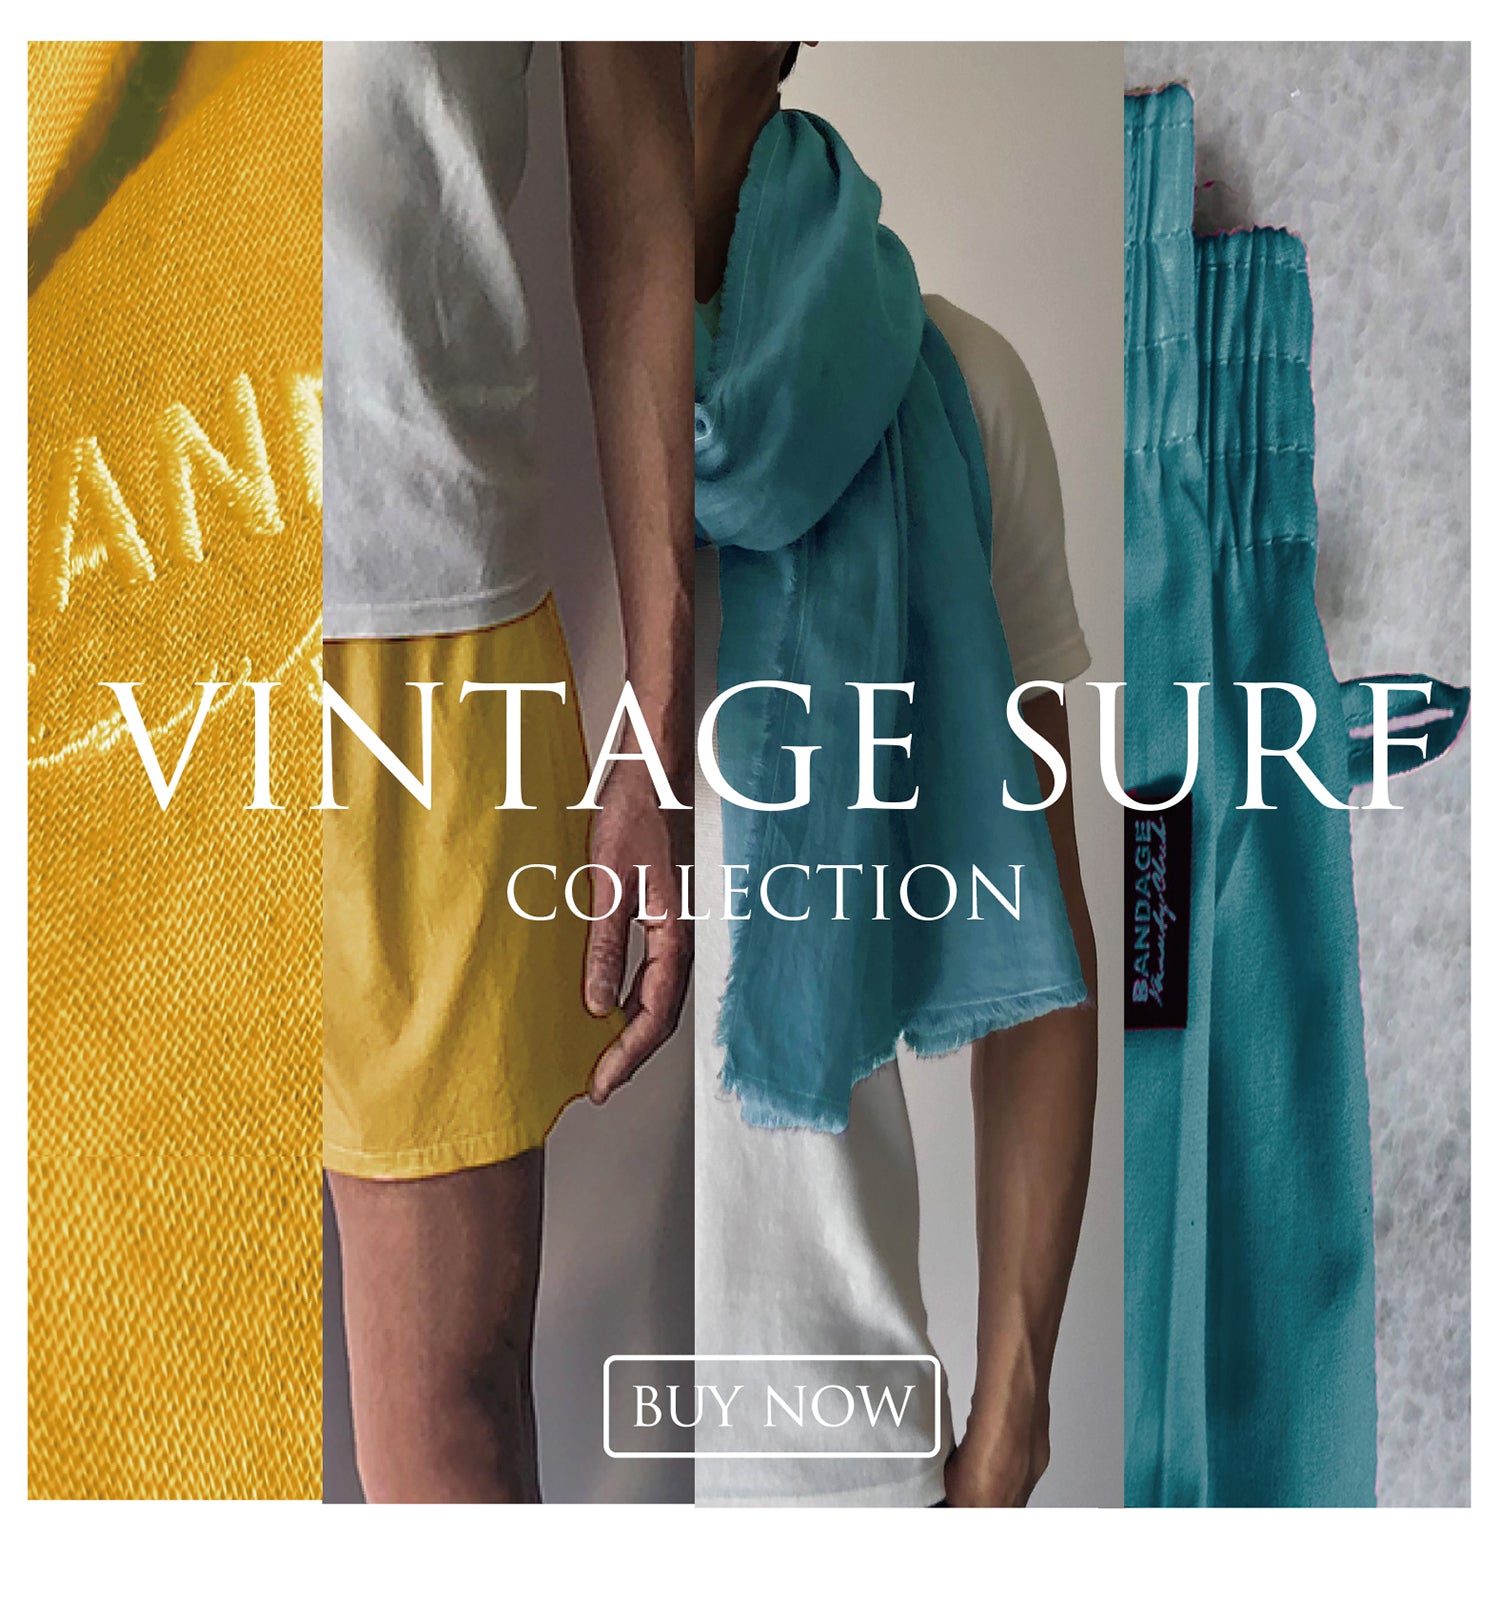 Vintage surf collection（ヴィンテージサーフコレクション）